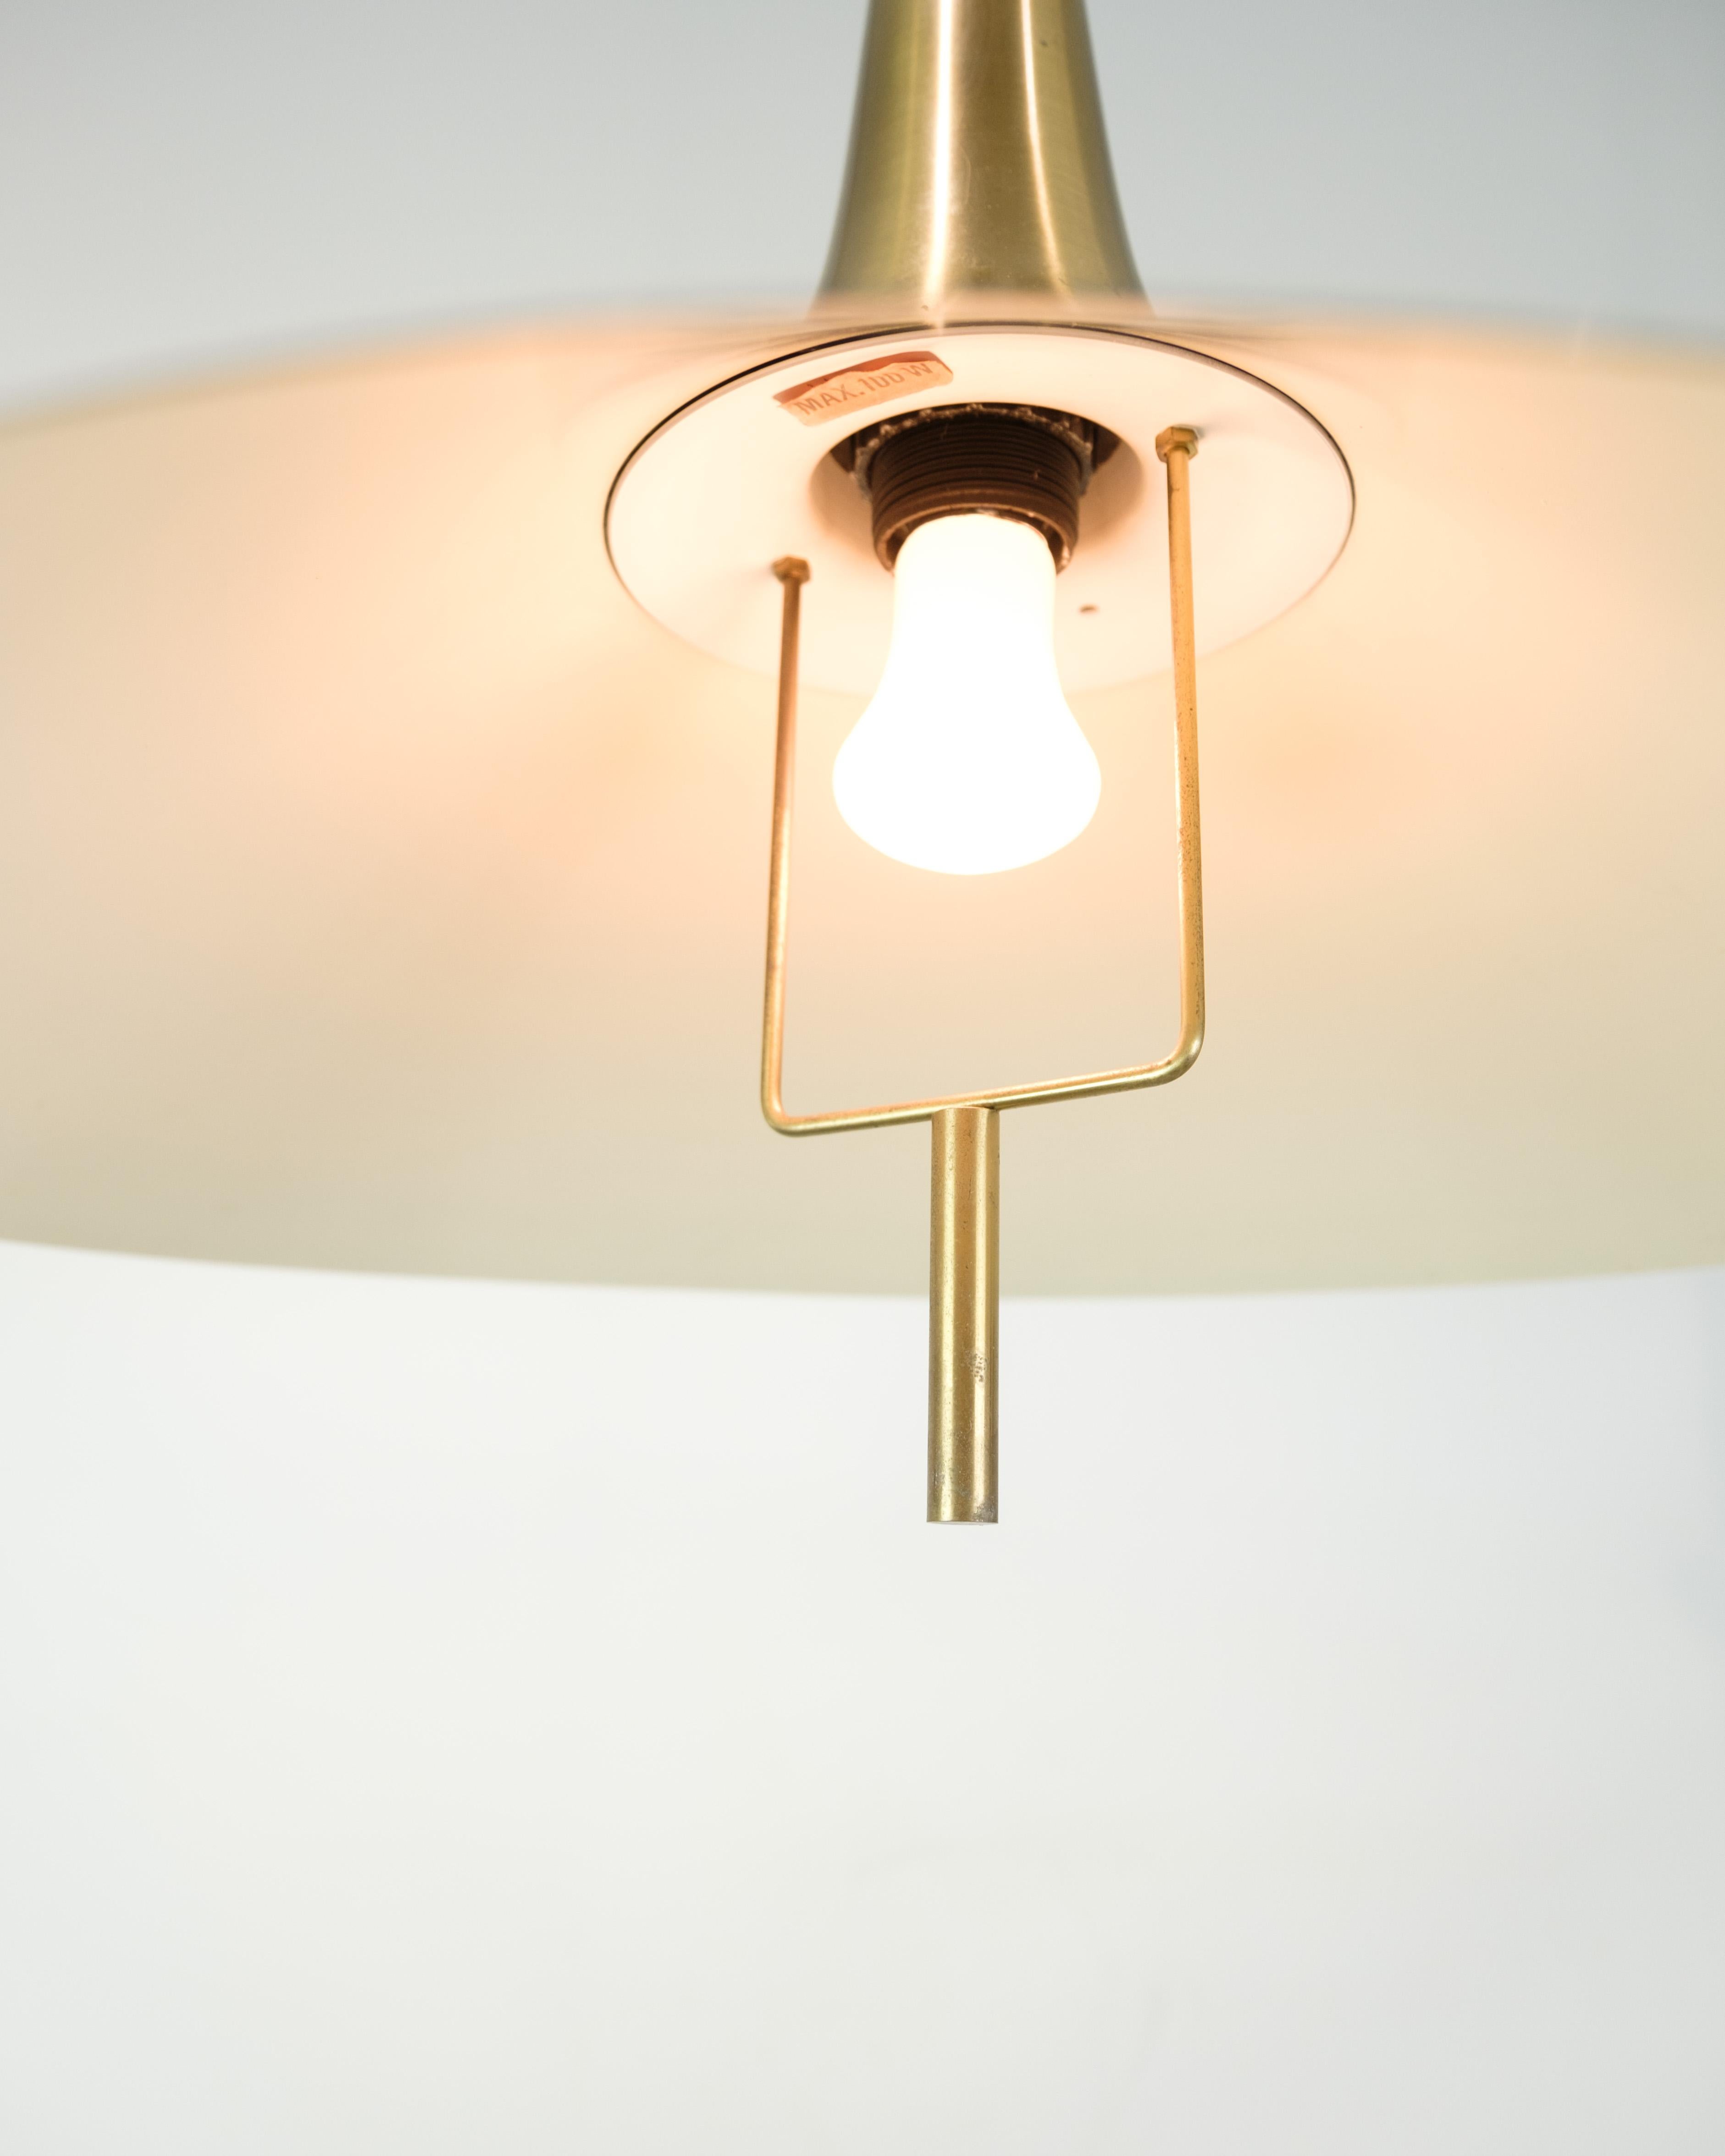 Ceiling lamp In Brass With a Counterweight Pendant, Made by Lyfa From 1960s In Good Condition For Sale In Lejre, DK